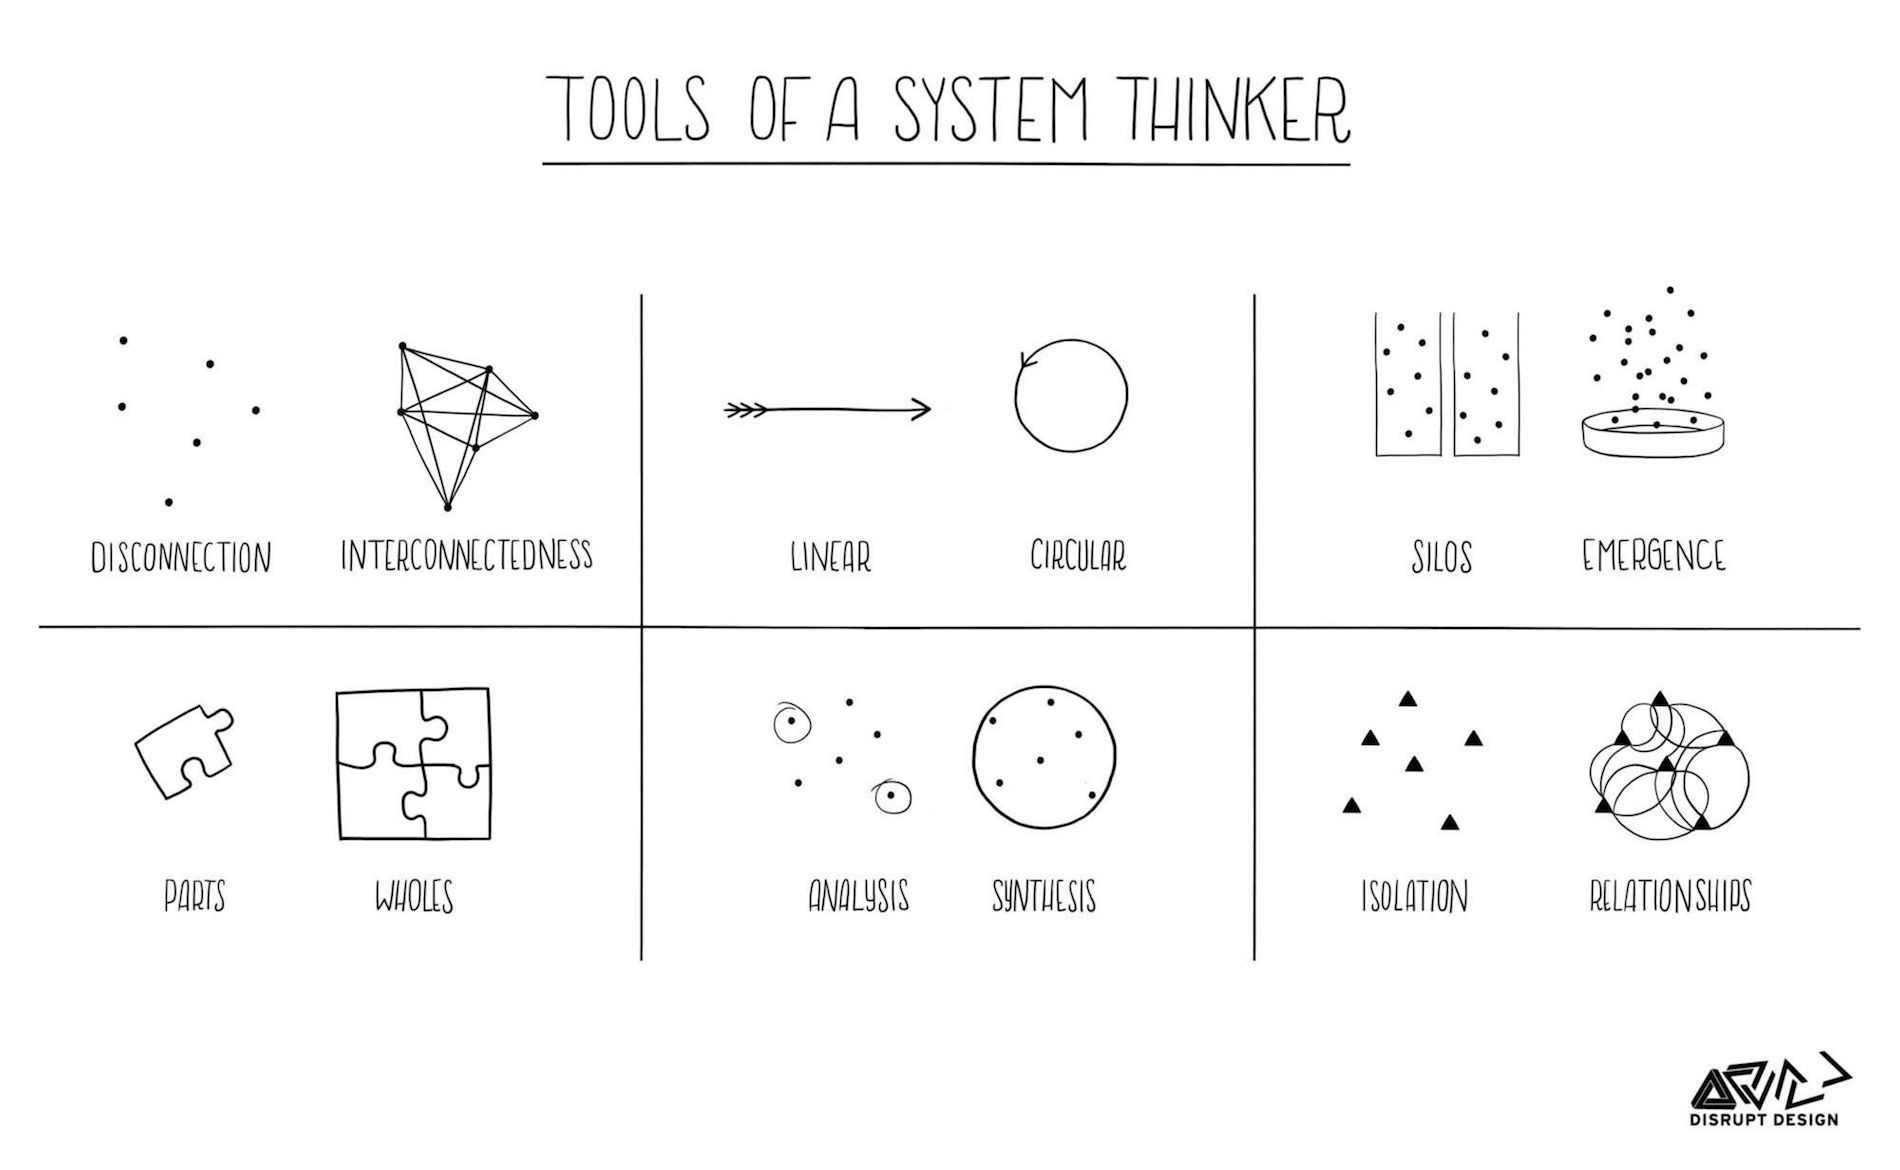 A graph titled "Tools Of A System Thinker" with 6 interconnected squares: Disconnection/Interconnectedness, Linear/Circular, Silos/Emergence, Parts/Wholes, Analysis/Synthesis, Isolation/Relationships